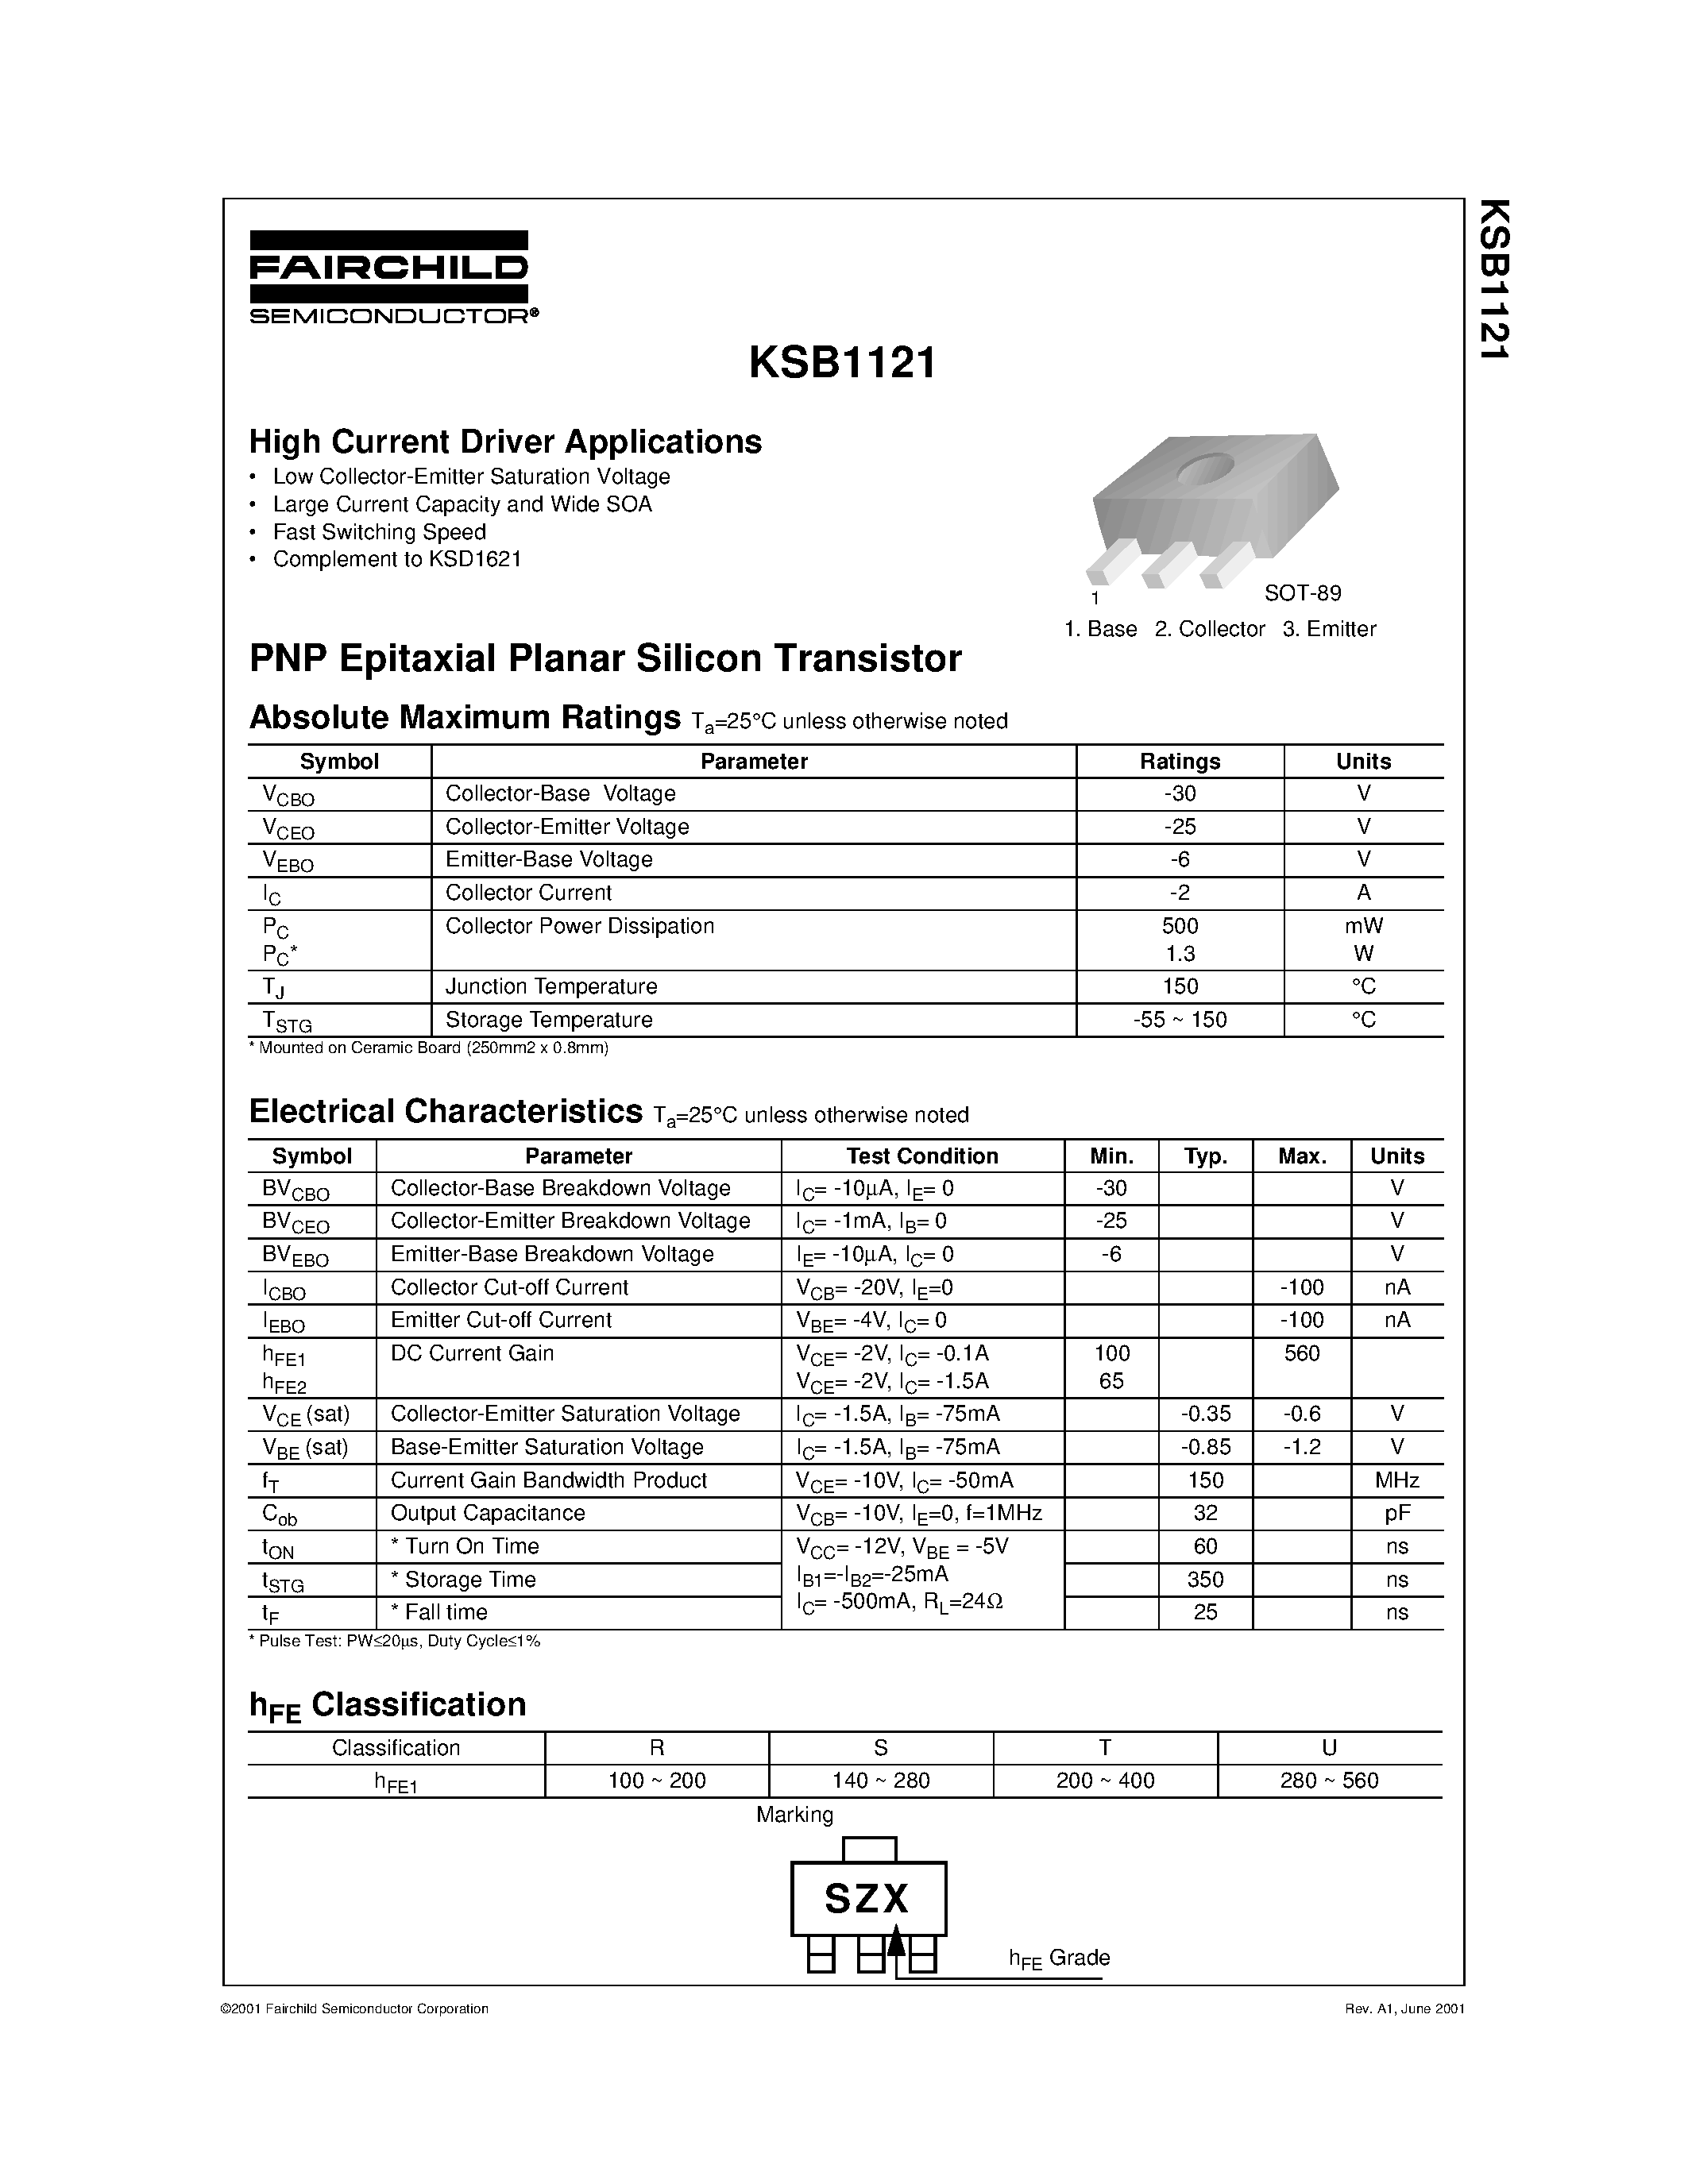 Datasheet KSB1121 - High Current Driver Applications page 1